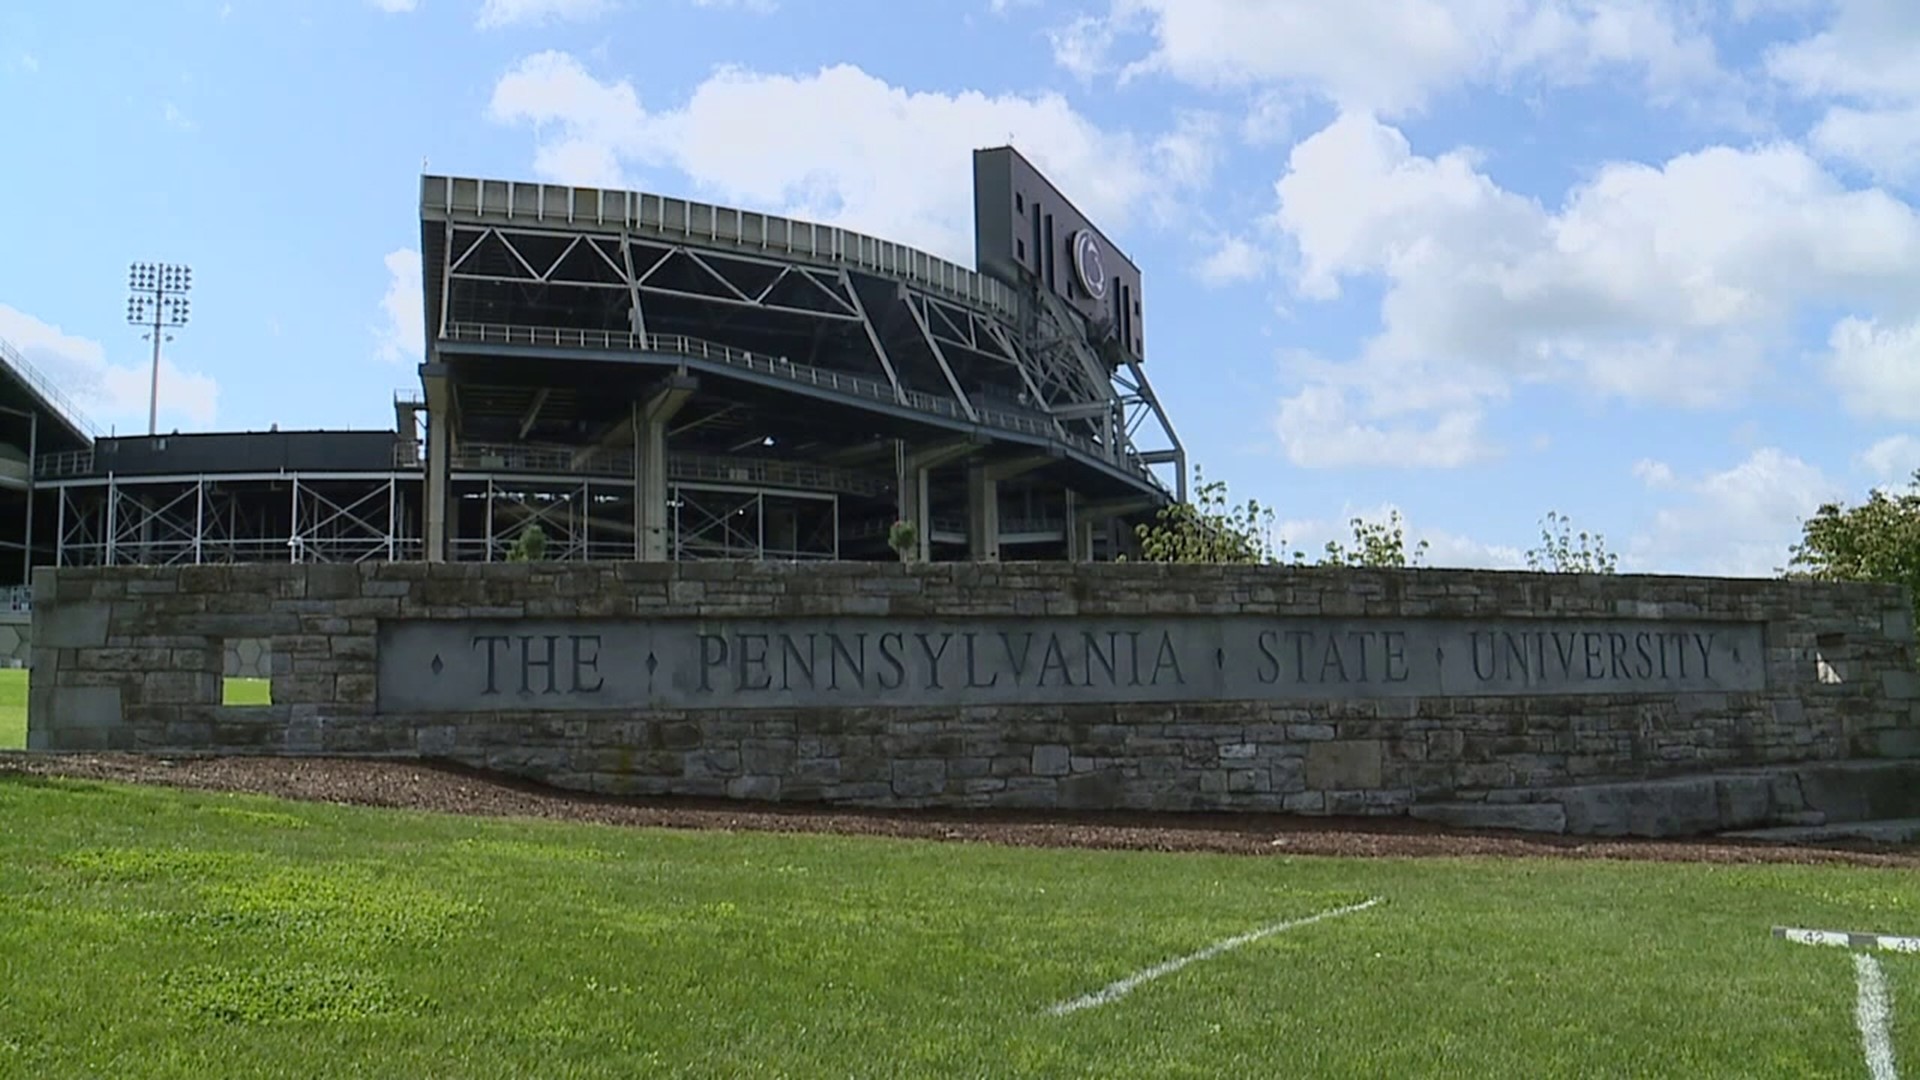 Newswatch 16's Chris Keating took a trip to Happy Valley to see what fans think of beer sales inside the stadium.